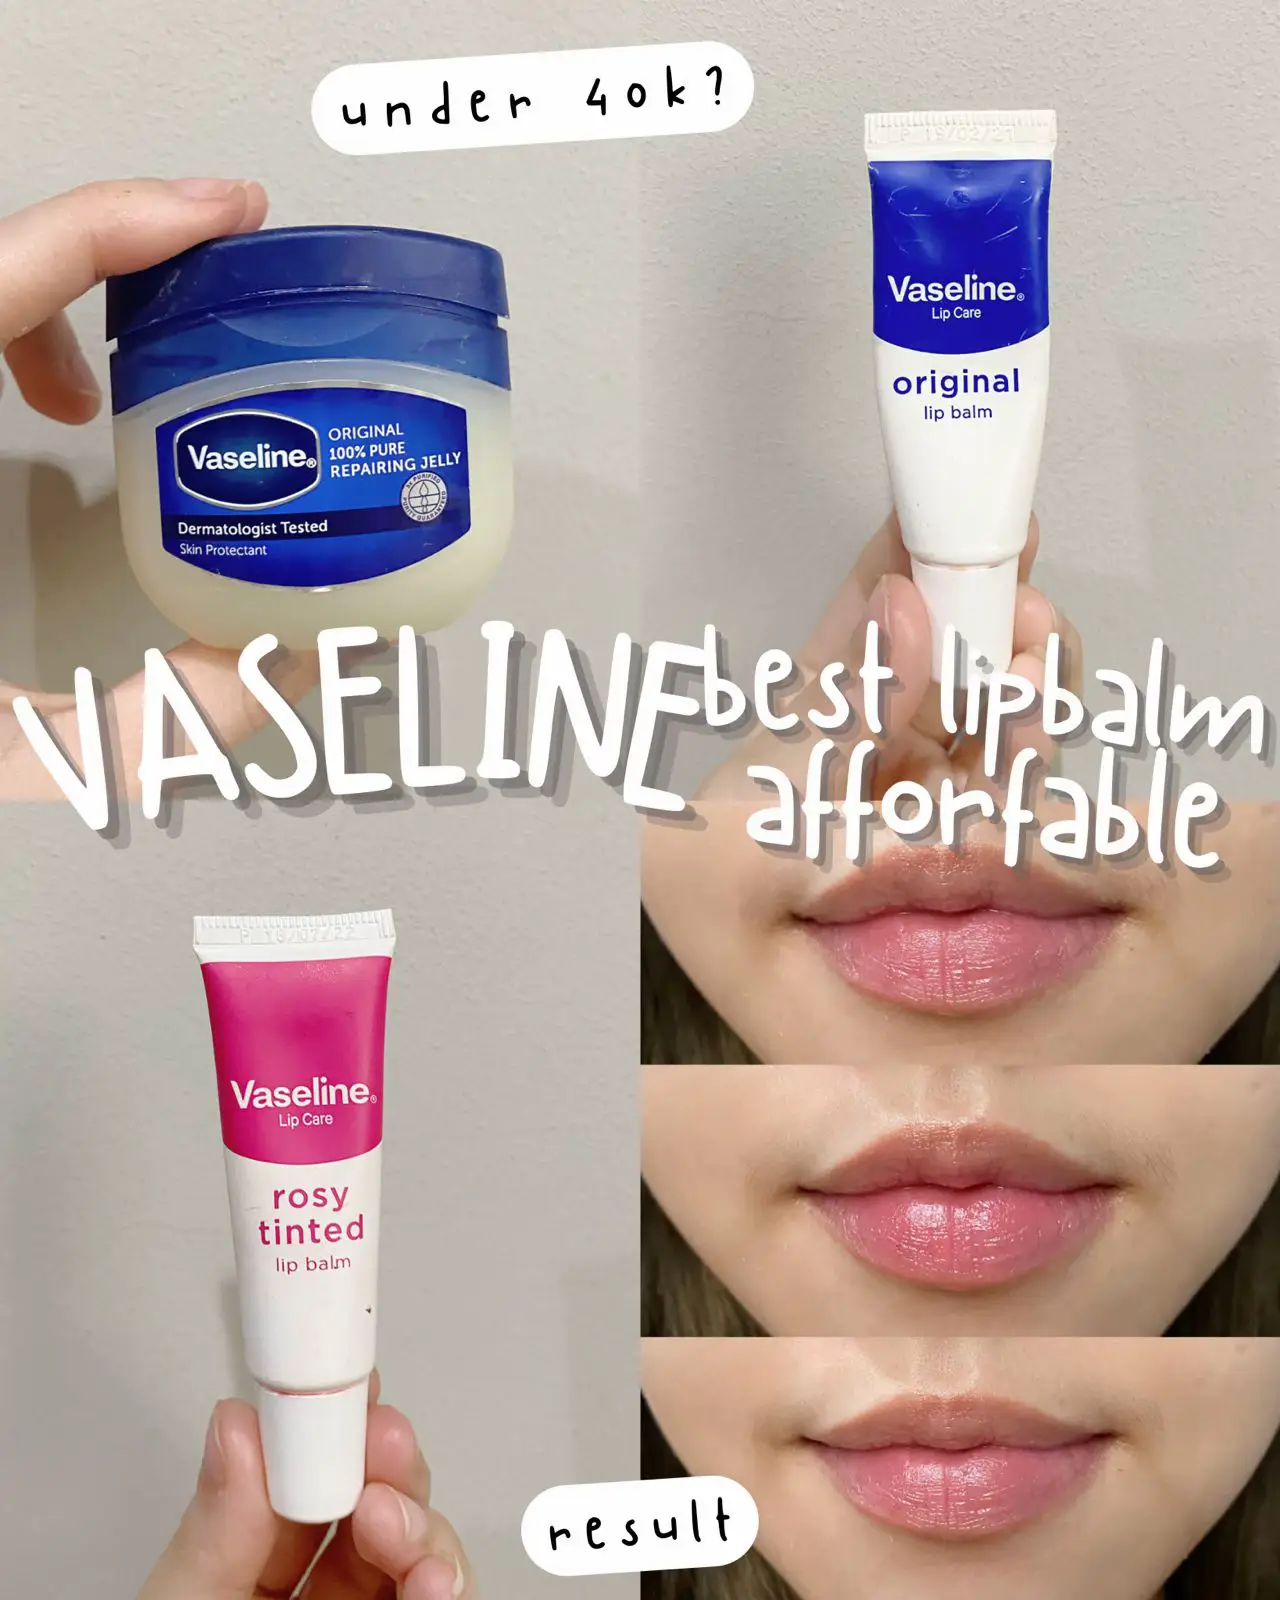 Vaseline Lip Therapy Review: I Swear by This Lip Balm for Chapped Lips